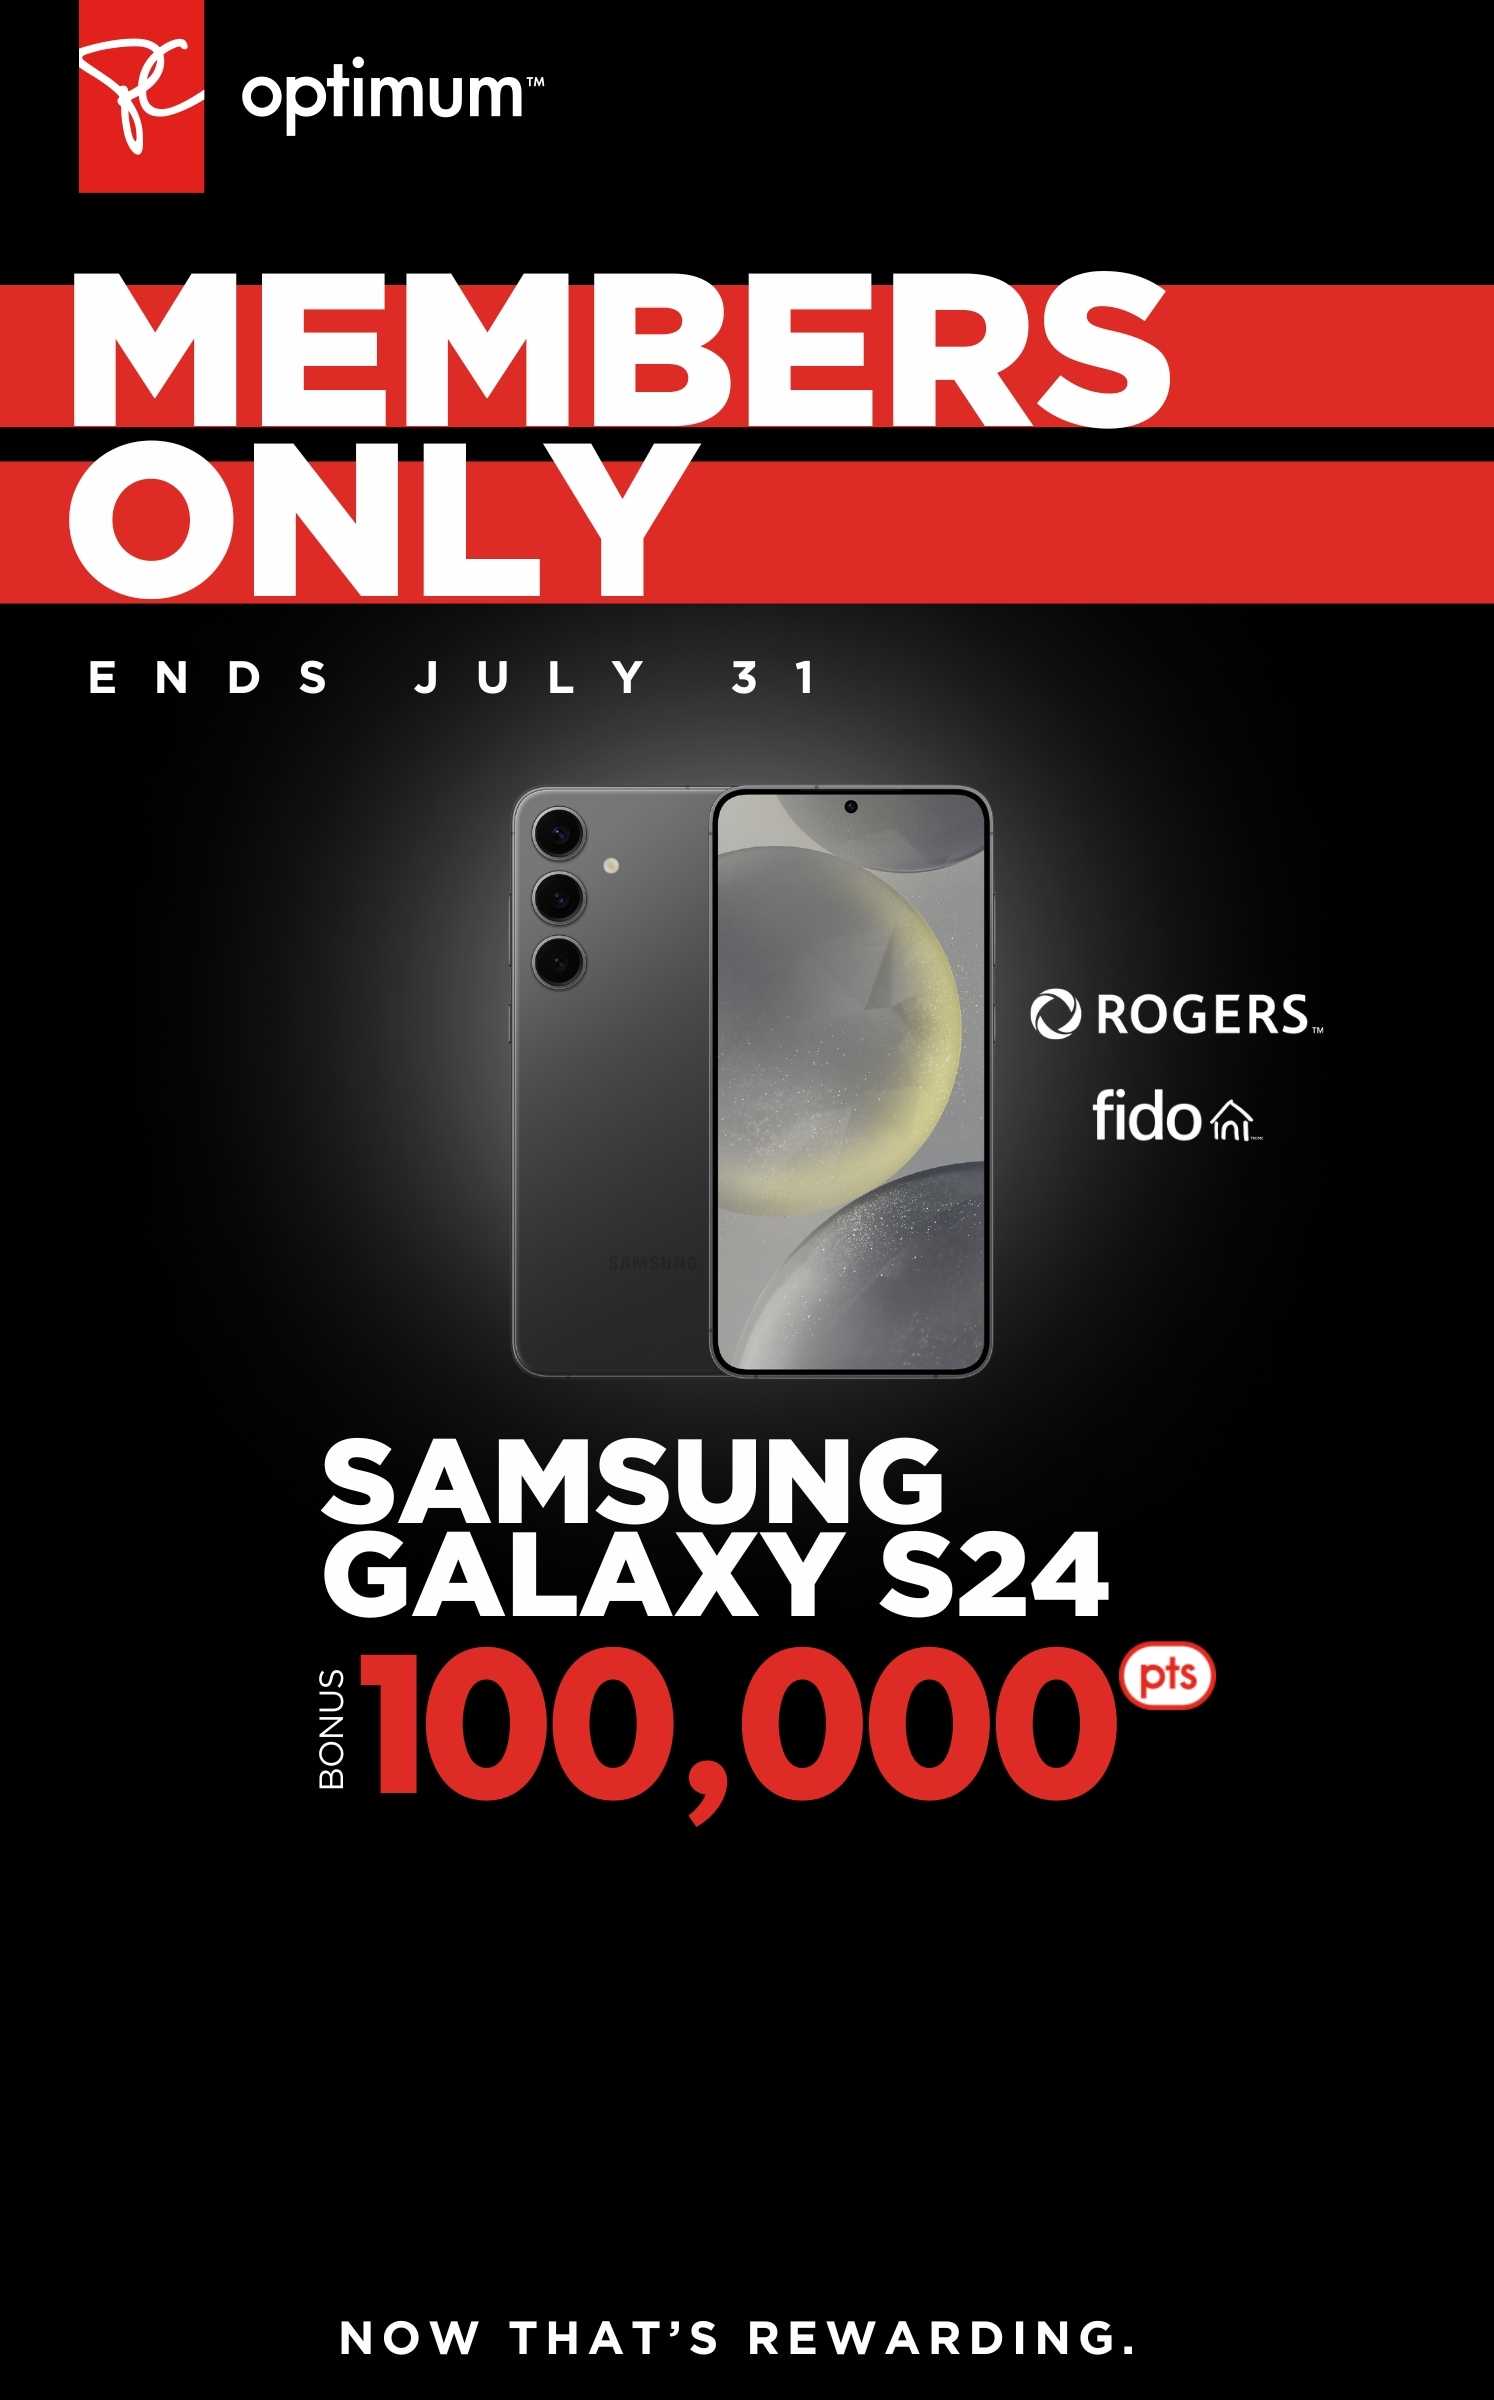 Members only: Get 100,000 points on a 2-year activation or upgrade on a Samsung S24 with Rogers or Fido. Plus, get a $100 credit for accessories in-store. Ends July 31 